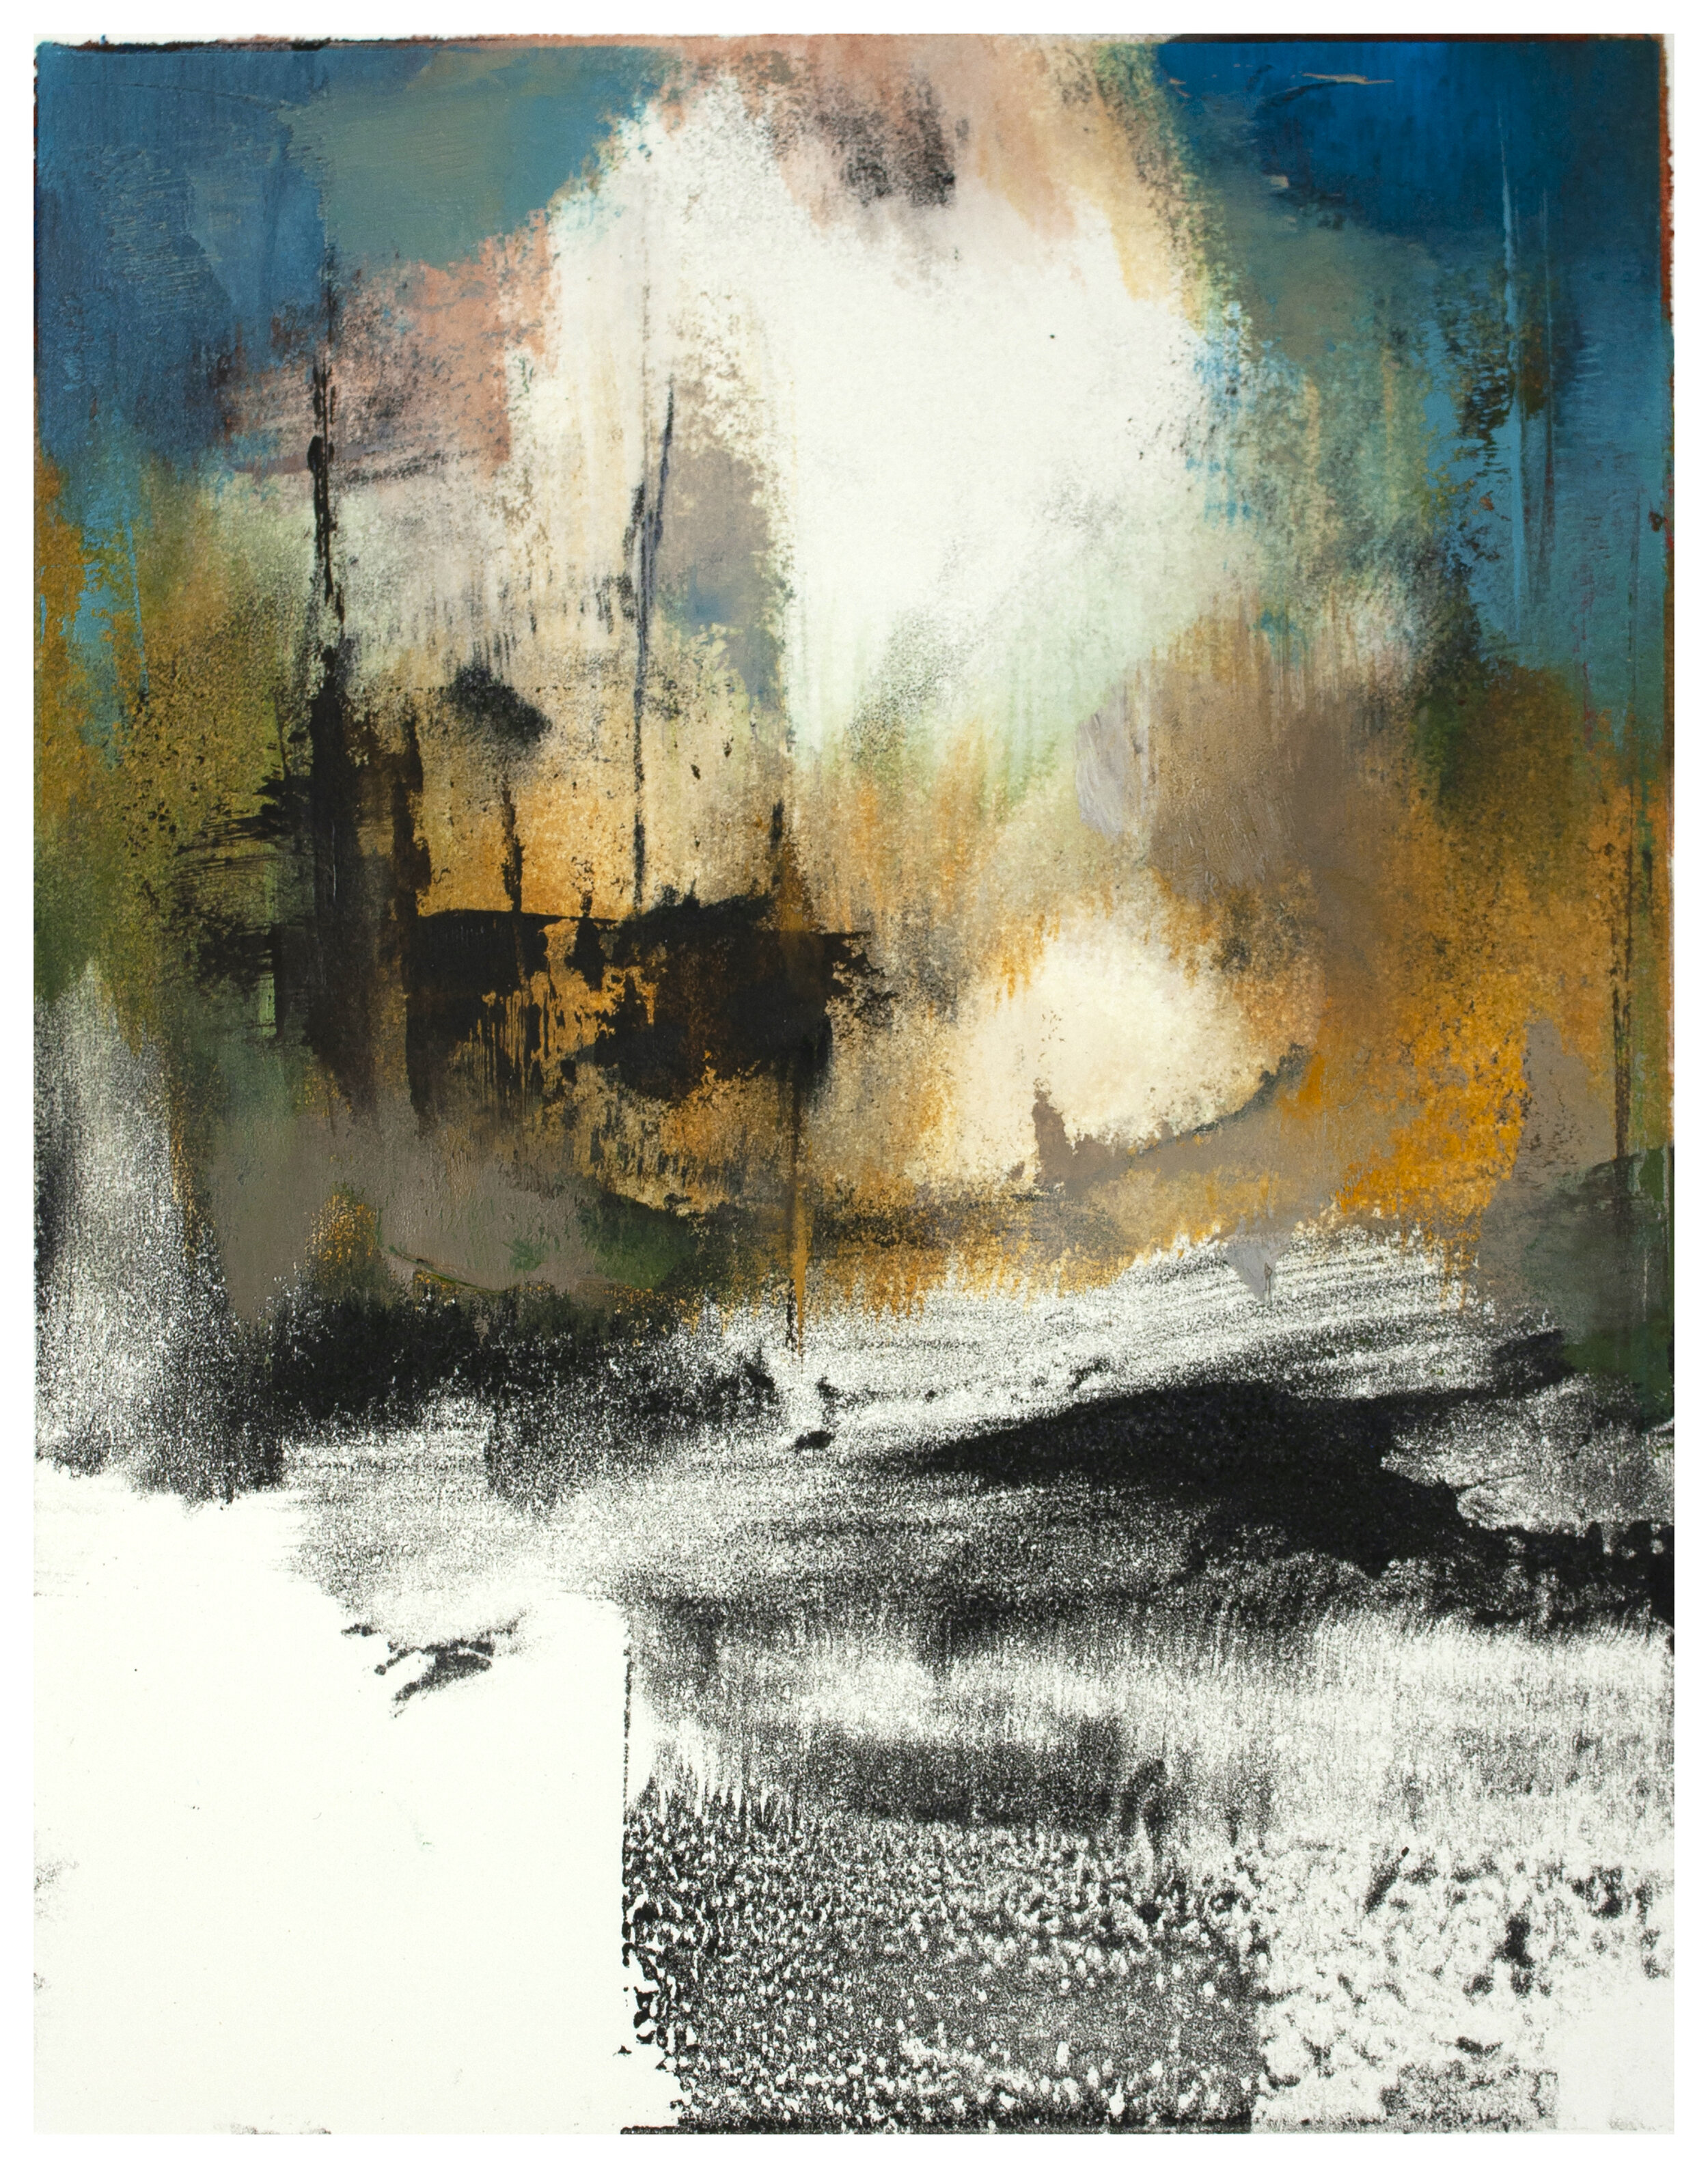 Untitled XXI. Monotype. 2020. Oil and Ink on 250g Stonehenge Paper. Image 11x14cm. Paper 28 x 38cm.jpg